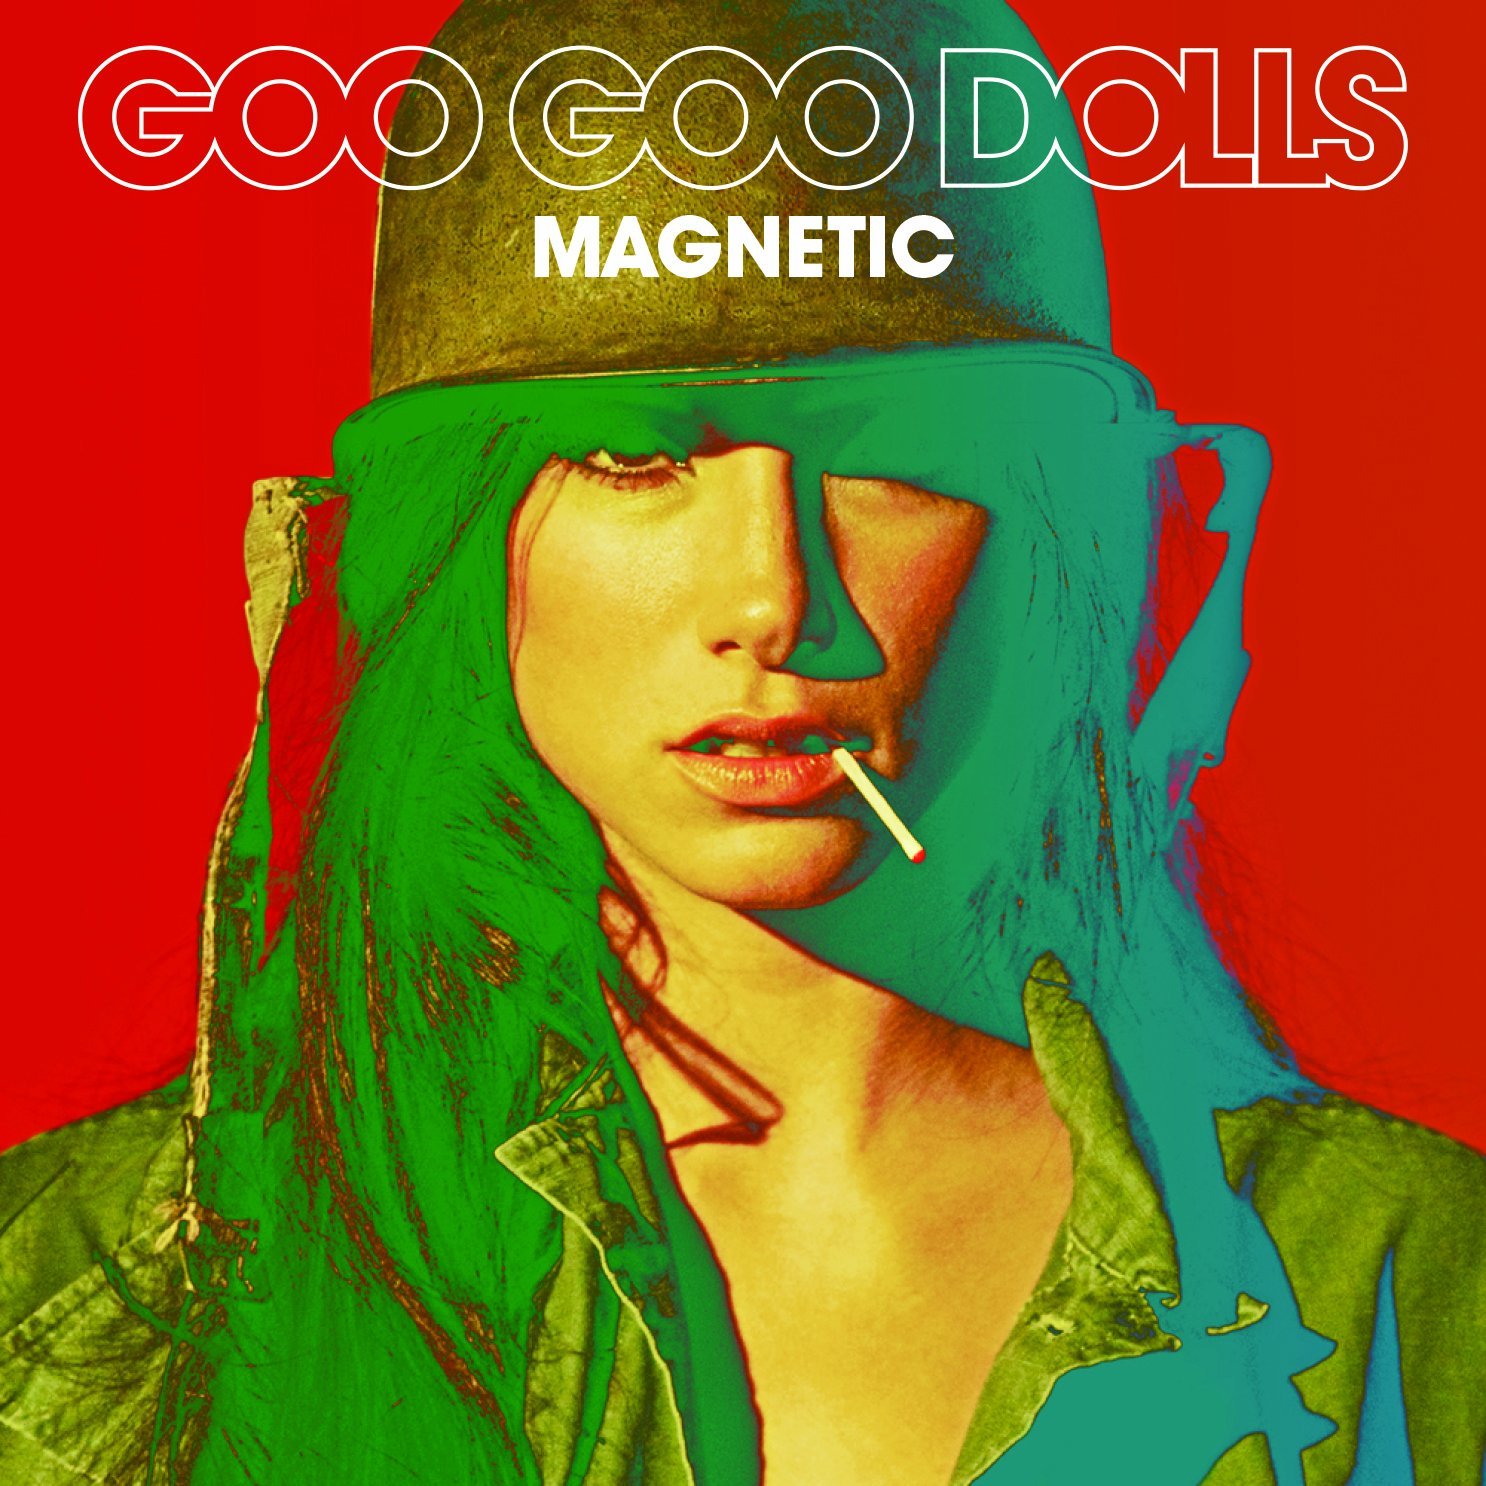 News Added Feb 13, 2013 Magnetic is the tenth studio album by American rock band Goo Goo Dolls. It is scheduled for release on June 11, 2013 through Warner Bros. Records. The recording process took place during the latter half of 2012 and into early 2013. On January 18, 2013, the band released the first […]